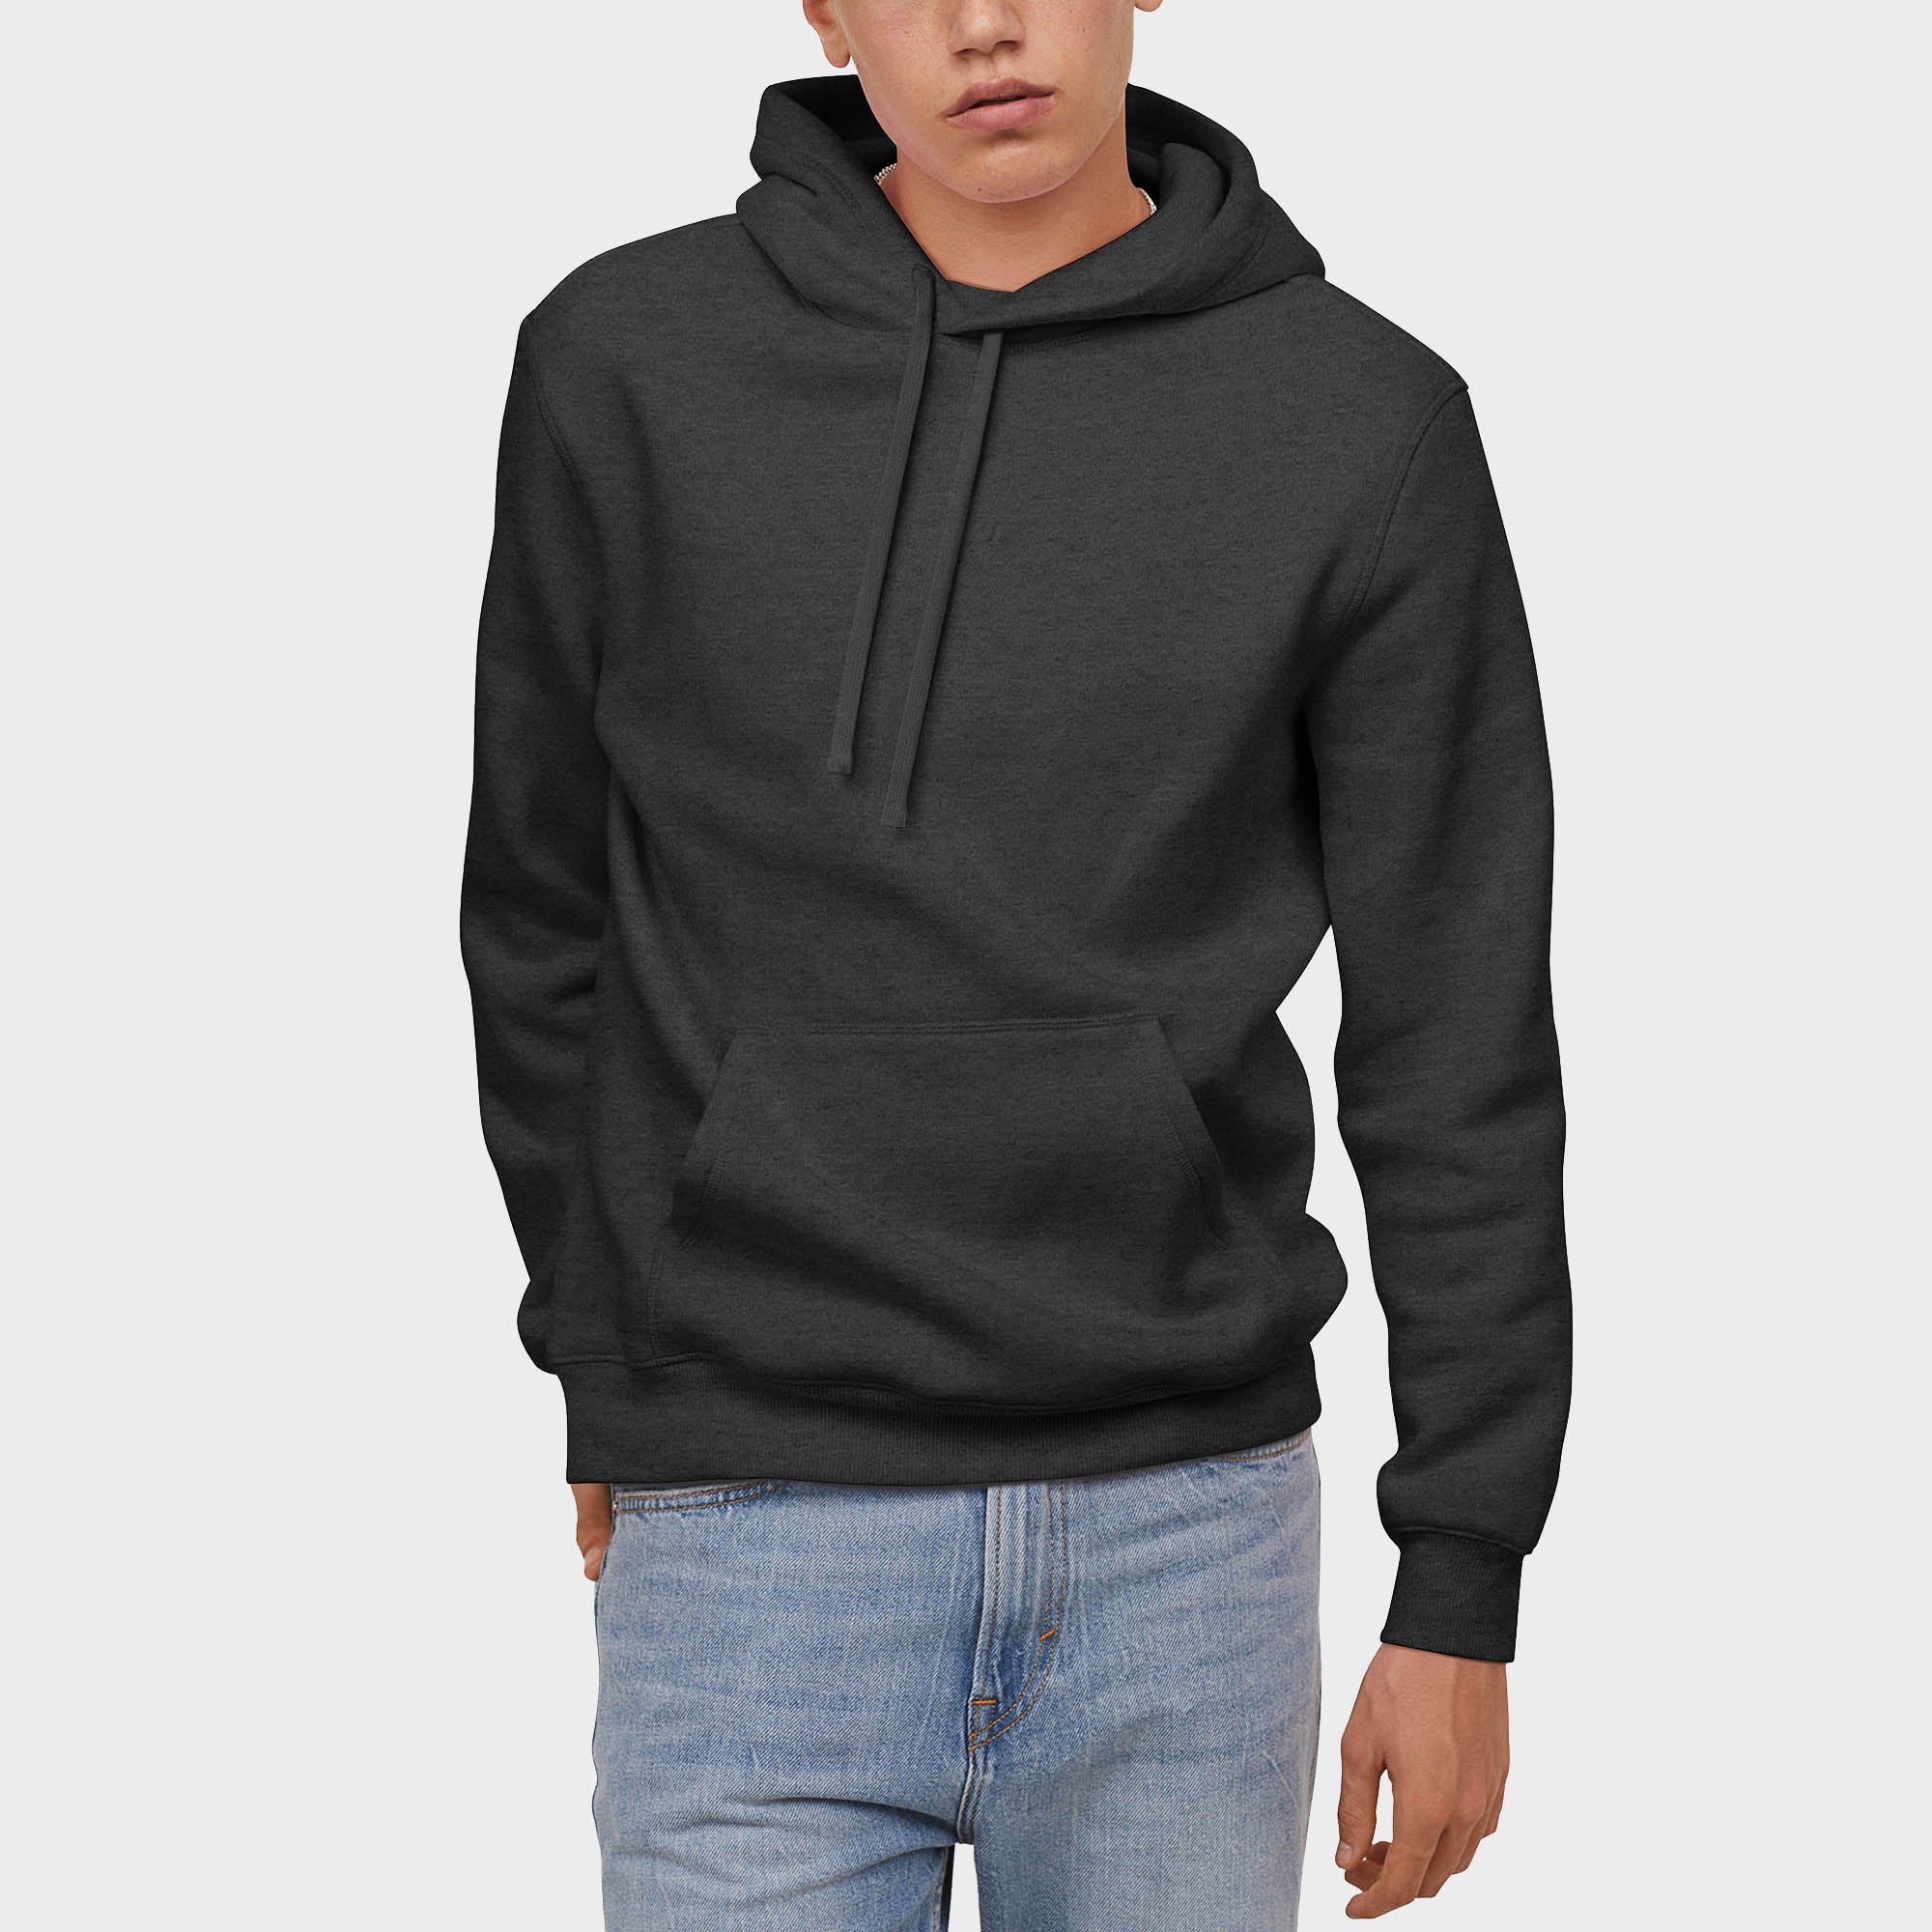 pullover hoodie_mens pullover hoodie_pullover sweatshirt_champion pullover hoodie_hooded pullover_heavyweight pullover hoodie_Charcoal